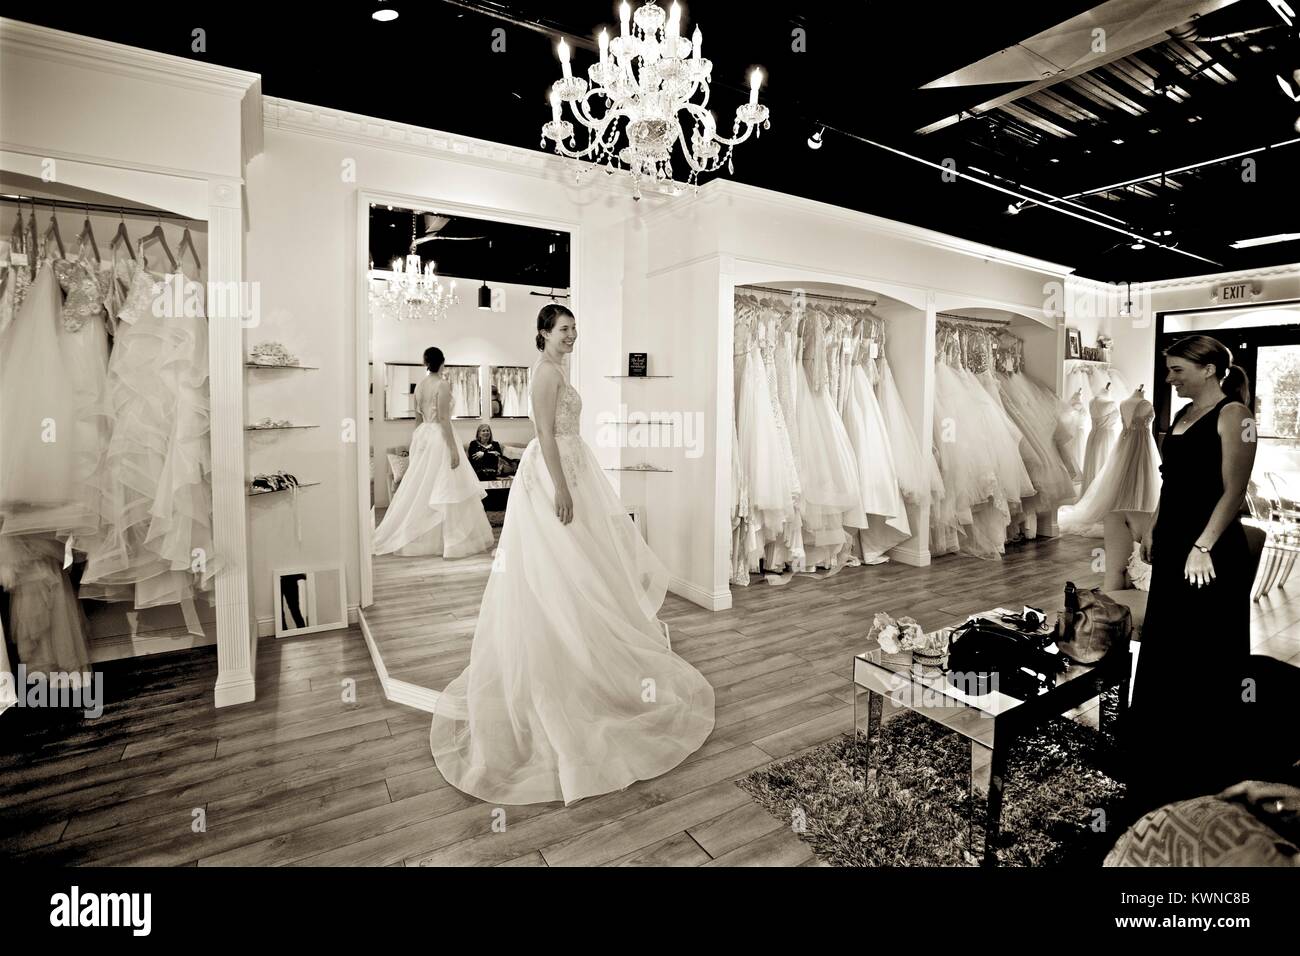 Bridal gown fitting at a bridal boutique Stock Photo